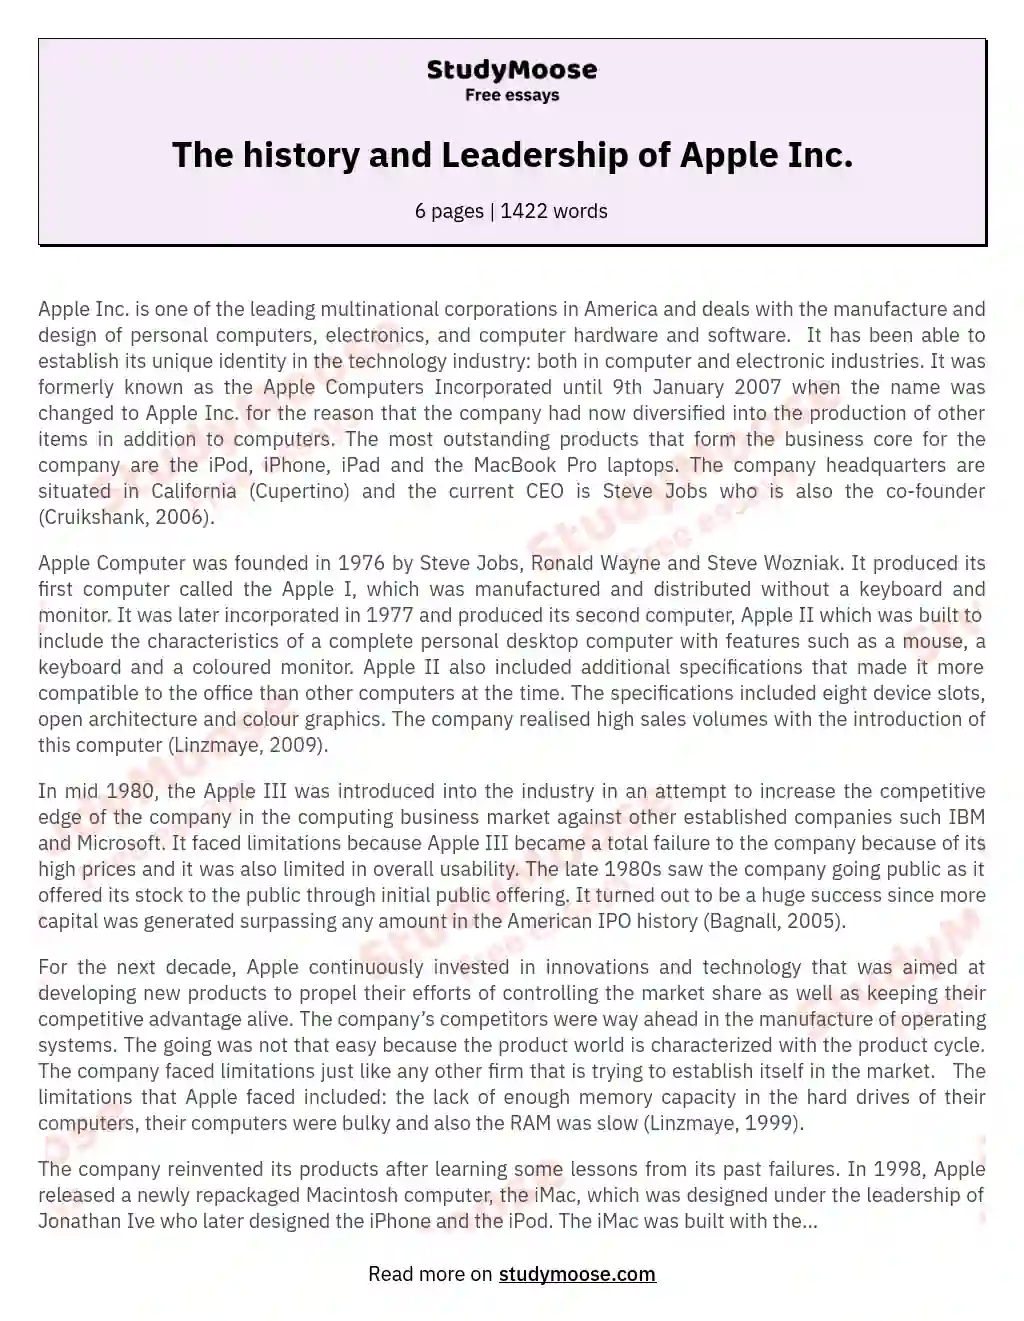 The history and Leadership of Apple Inc. essay